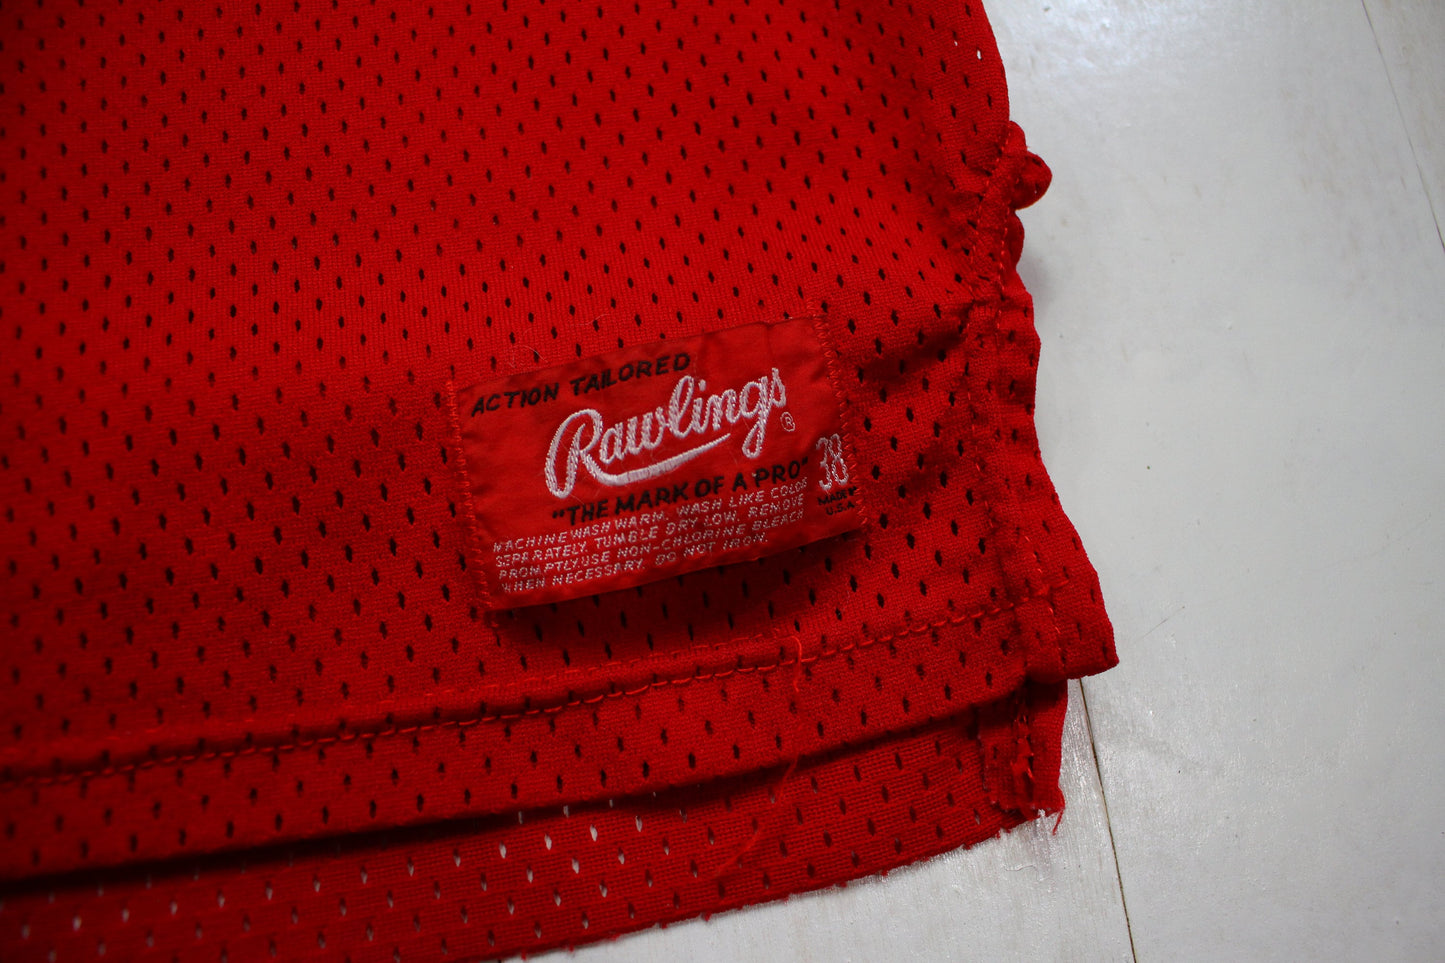 1980s Rawlings Muscatine Iowa 11 Basketball Jersey Made in Canada Size S